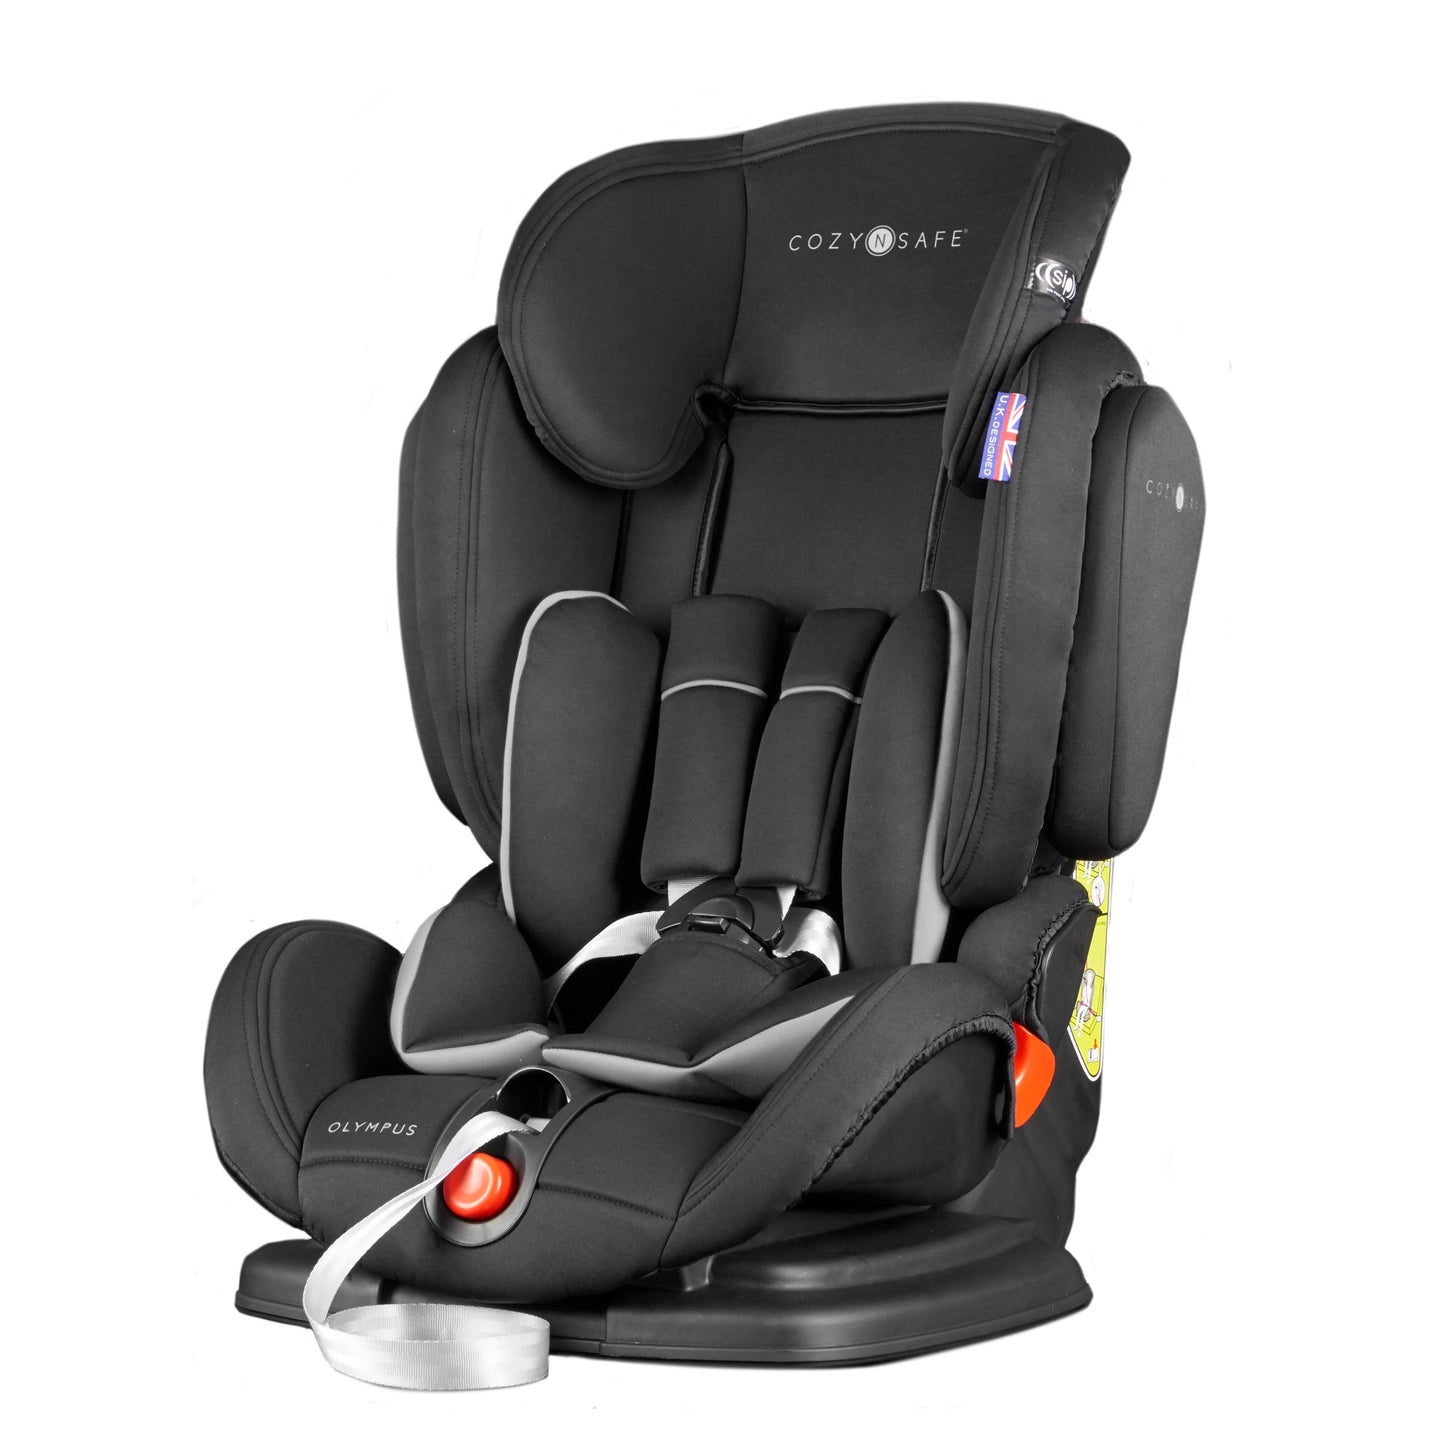 The Cozy N Safe Olympus Group 1/2/3 Car Seat